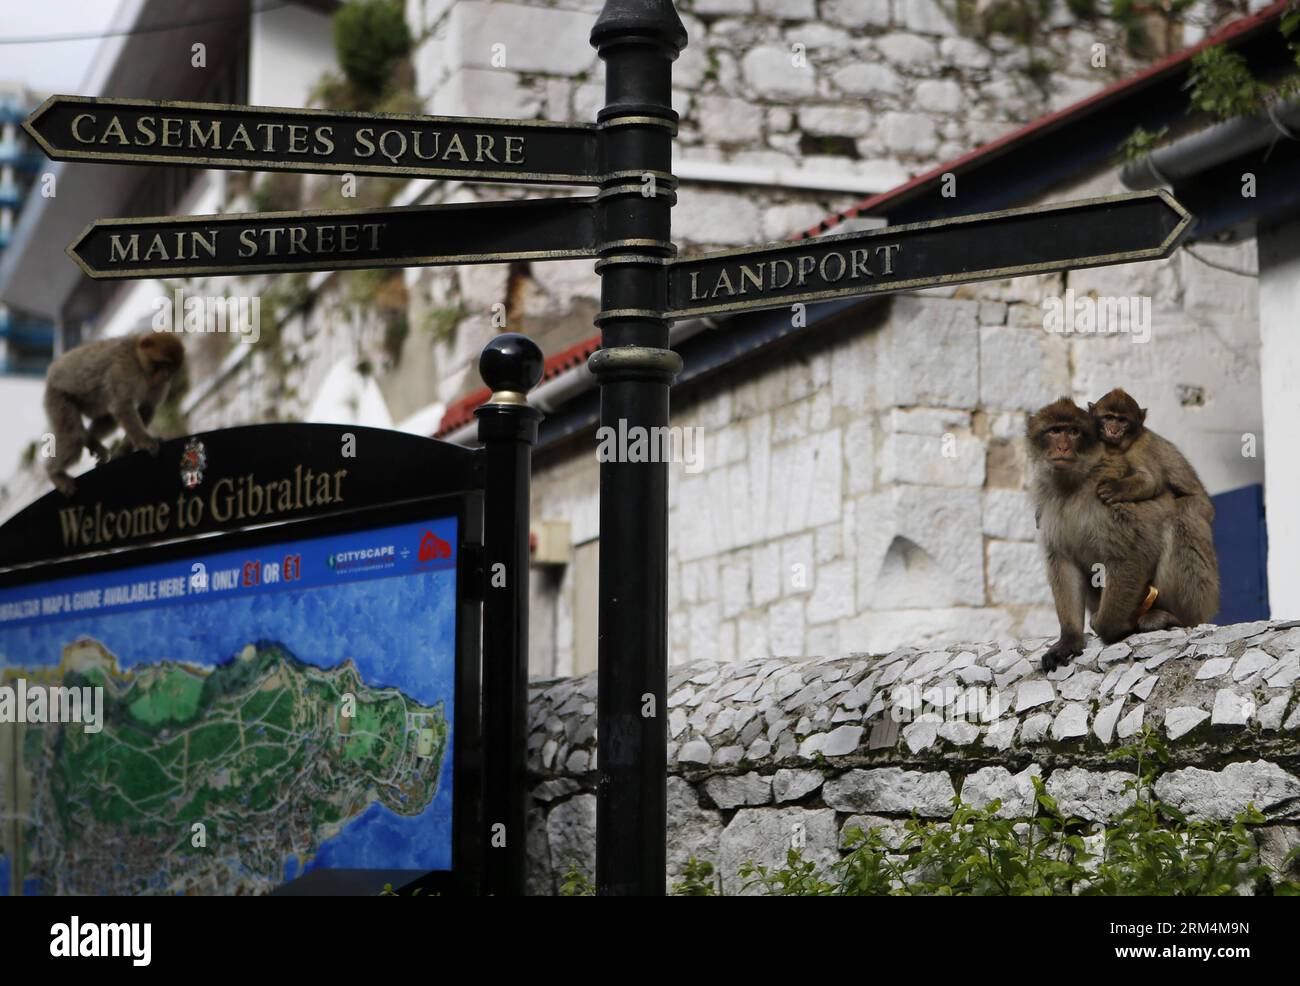 (130916) -- GIBRALTAR, Sep. 16, 2013 (Xinhua) -- Photo taken on Jan. 26, 2013 shows the Rock Apes (Barbary Macaque, Macaca sylvanus) in Gibraltar. Located on the southern end of the Iberian Peninsula at the entrance of the Mediterranean, Gibraltar has an area of 6.7 square kilometers and a northern border with Spain. Spain ceded sovereignty of Gibraltar to Britain in 1713, but has persistently sought to regain the tiny southern territory. The latest dispute came after Gibraltar authorities dropped 70 blocks of concrete in the Bay of Algeciras with the aim of creating an artificial reef, which Stock Photo